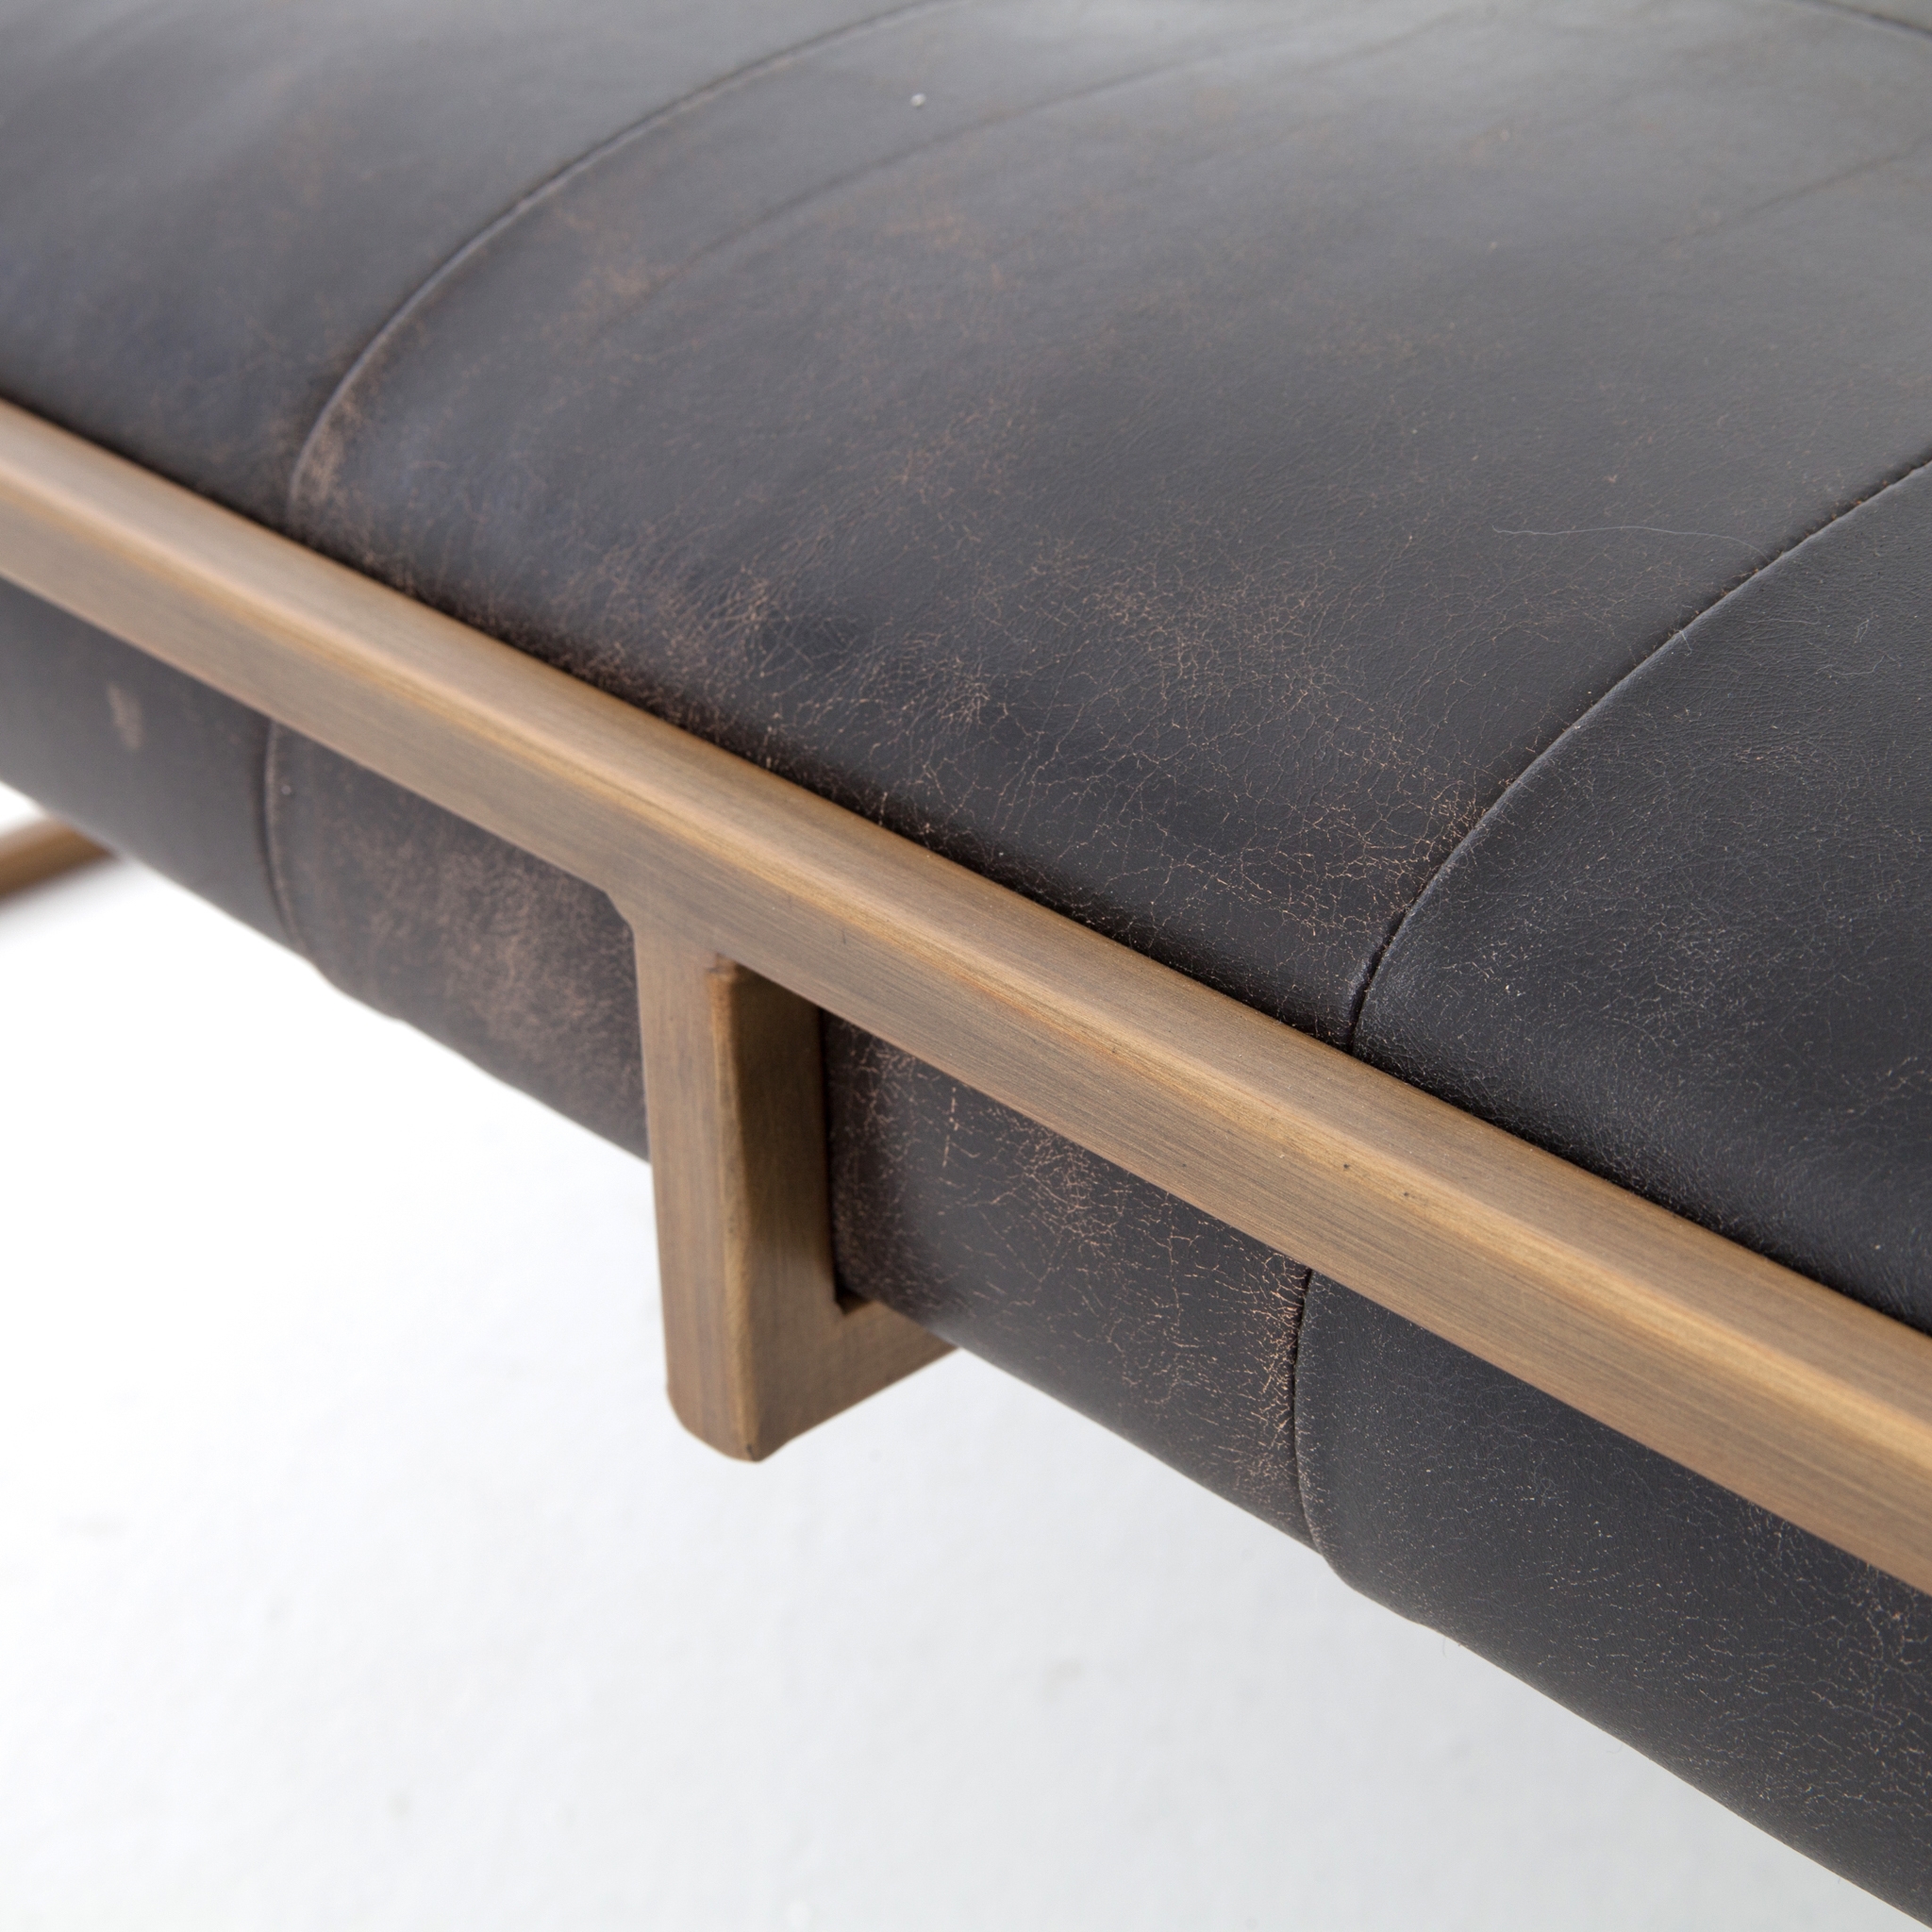 Olwina Square Leather Coffee Table - Image 3